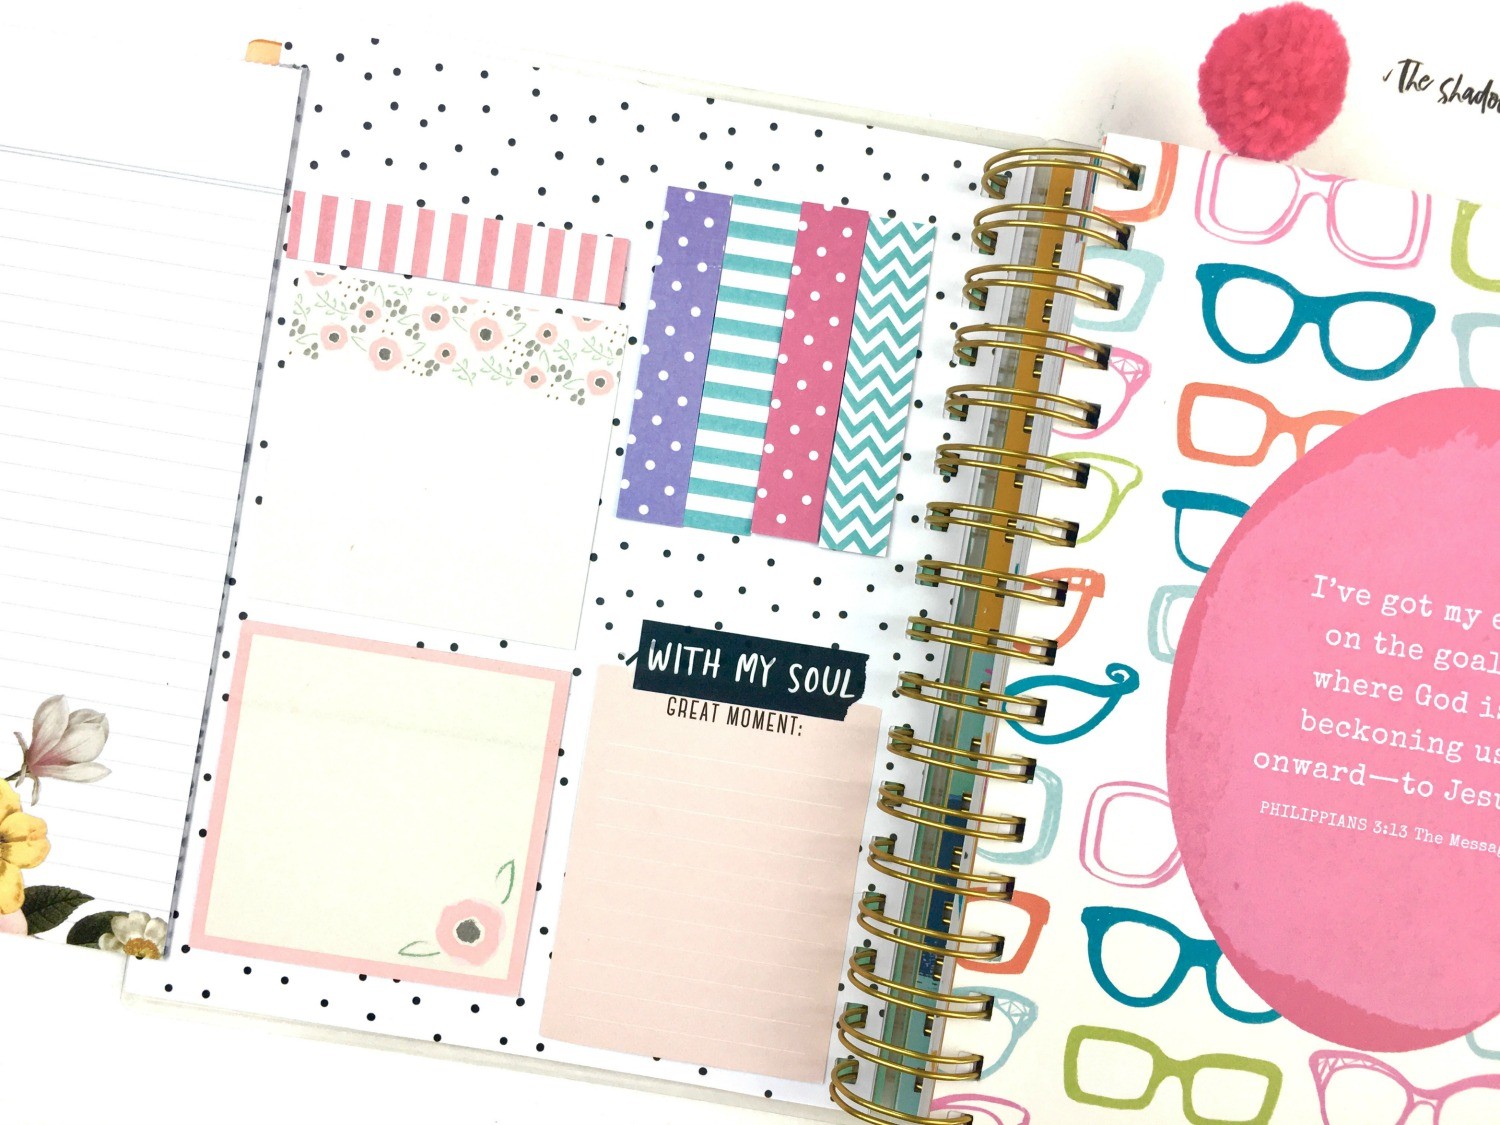 Stay Organized with Planner Tips and Ideas Using the Illustrated Faith Planner